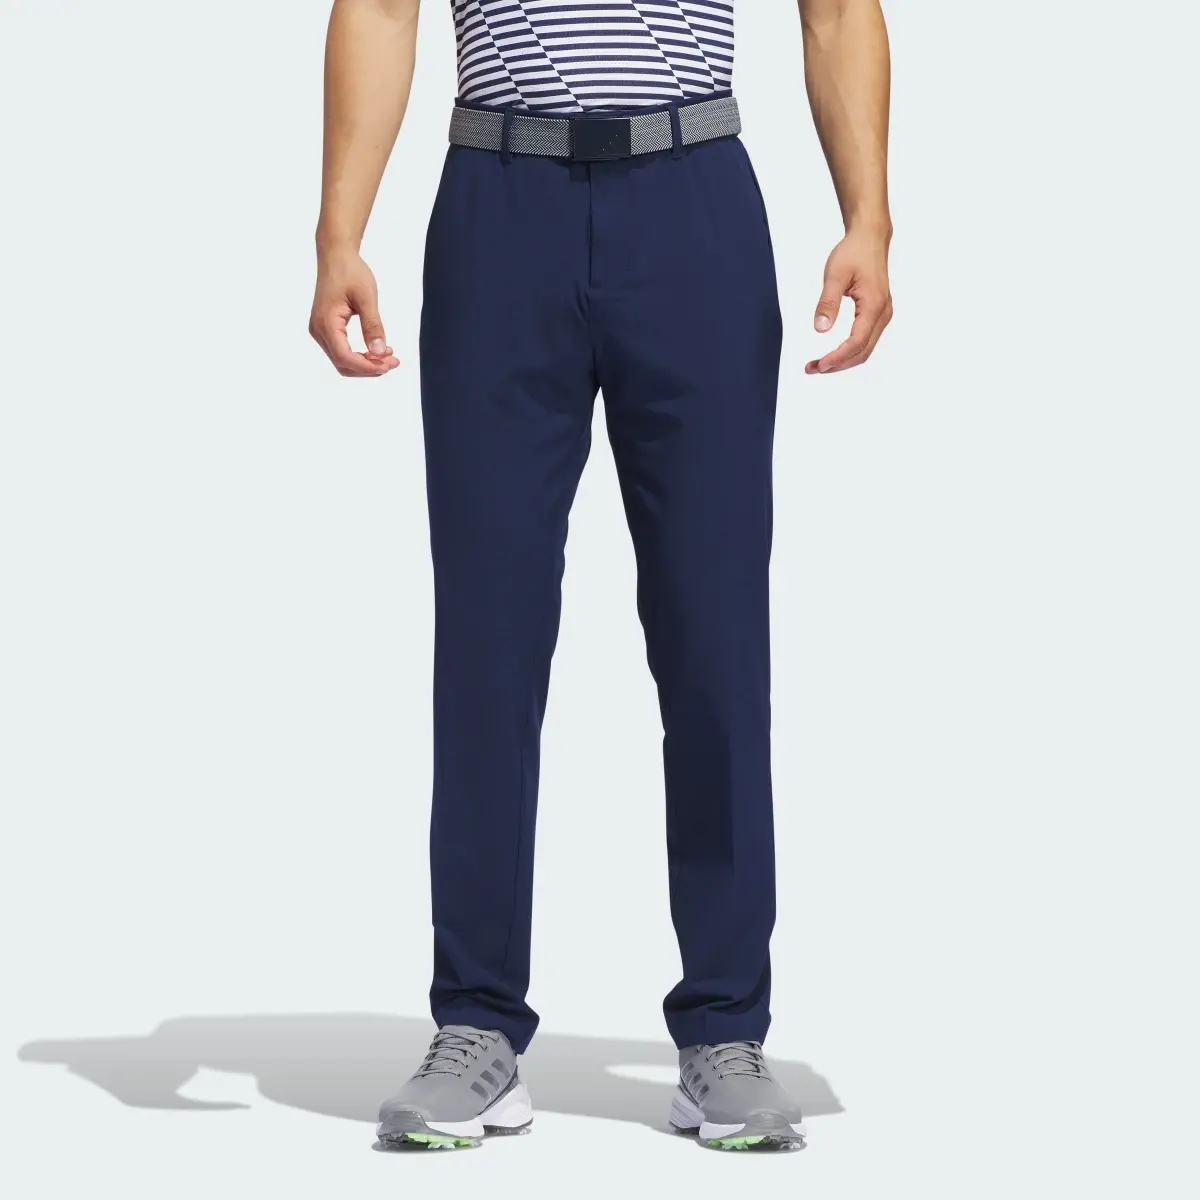 Adidas Ultimate365 Tapered Golf Trousers. 1